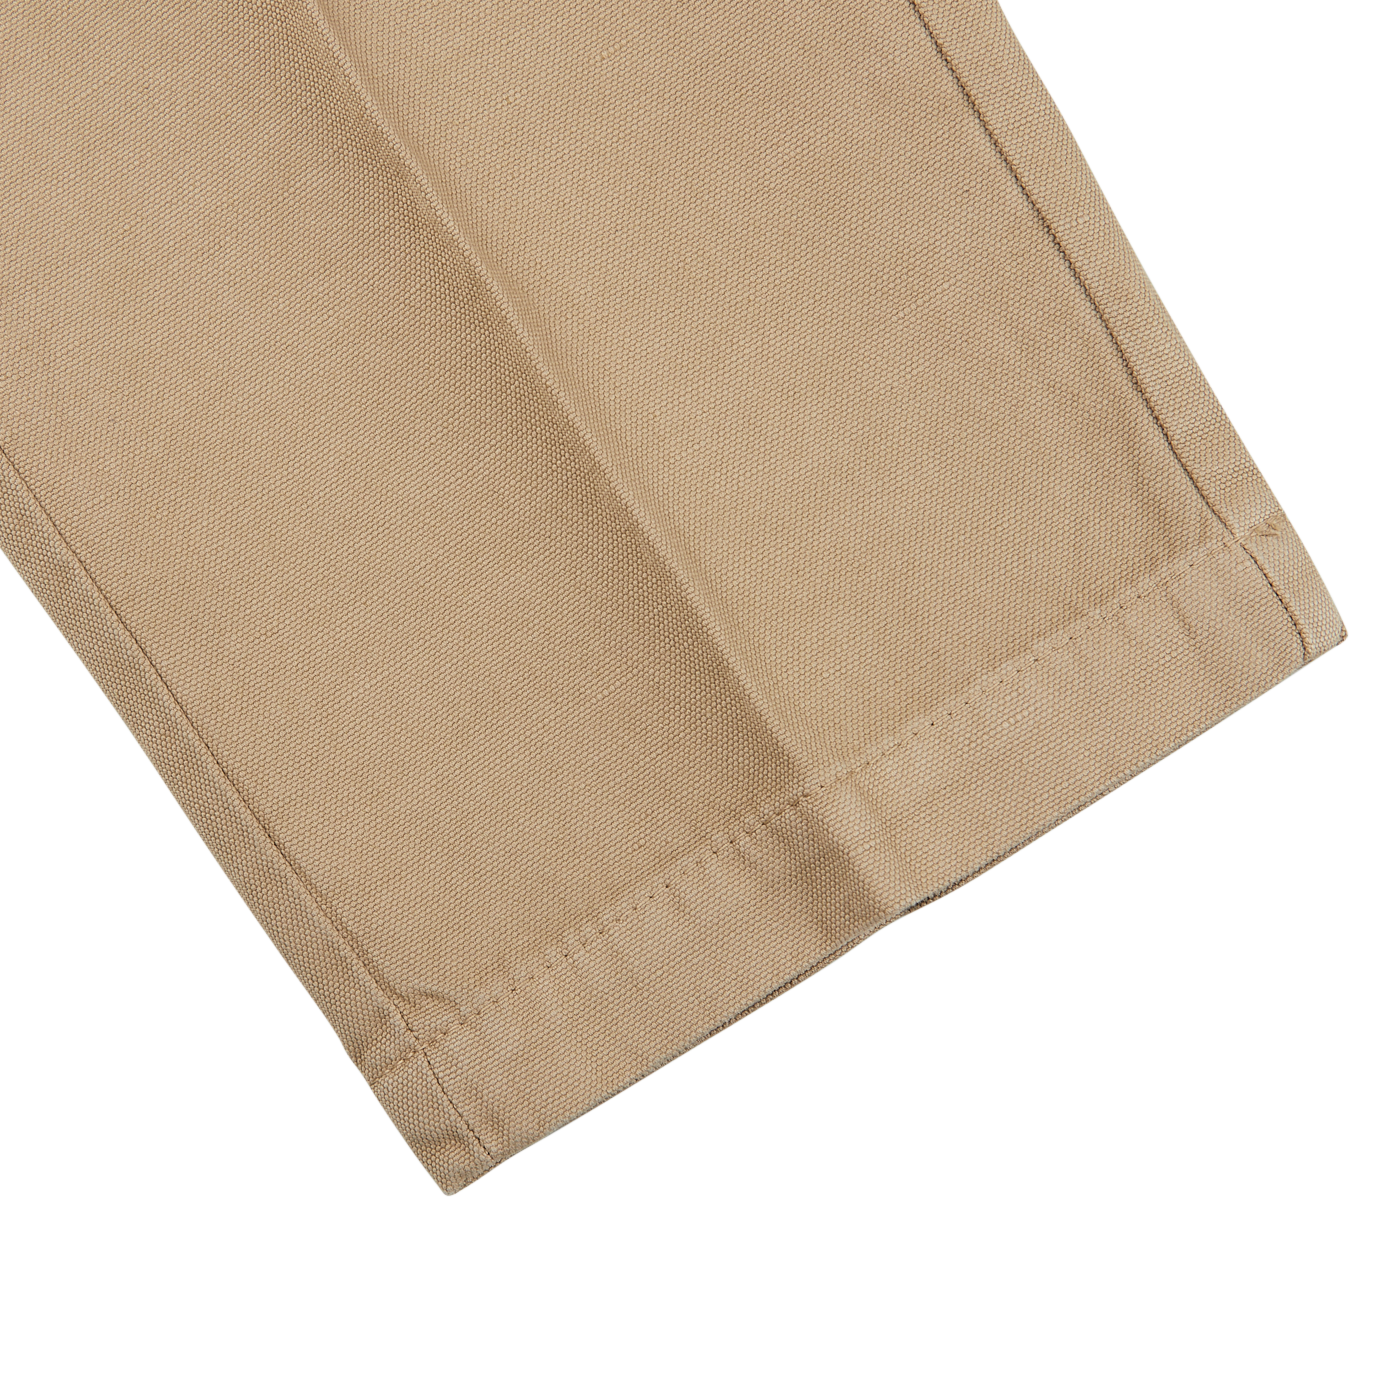 A pair of Beige Cotton Linen Duilio Trousers by Tela Genova, in tan color, on a white background.